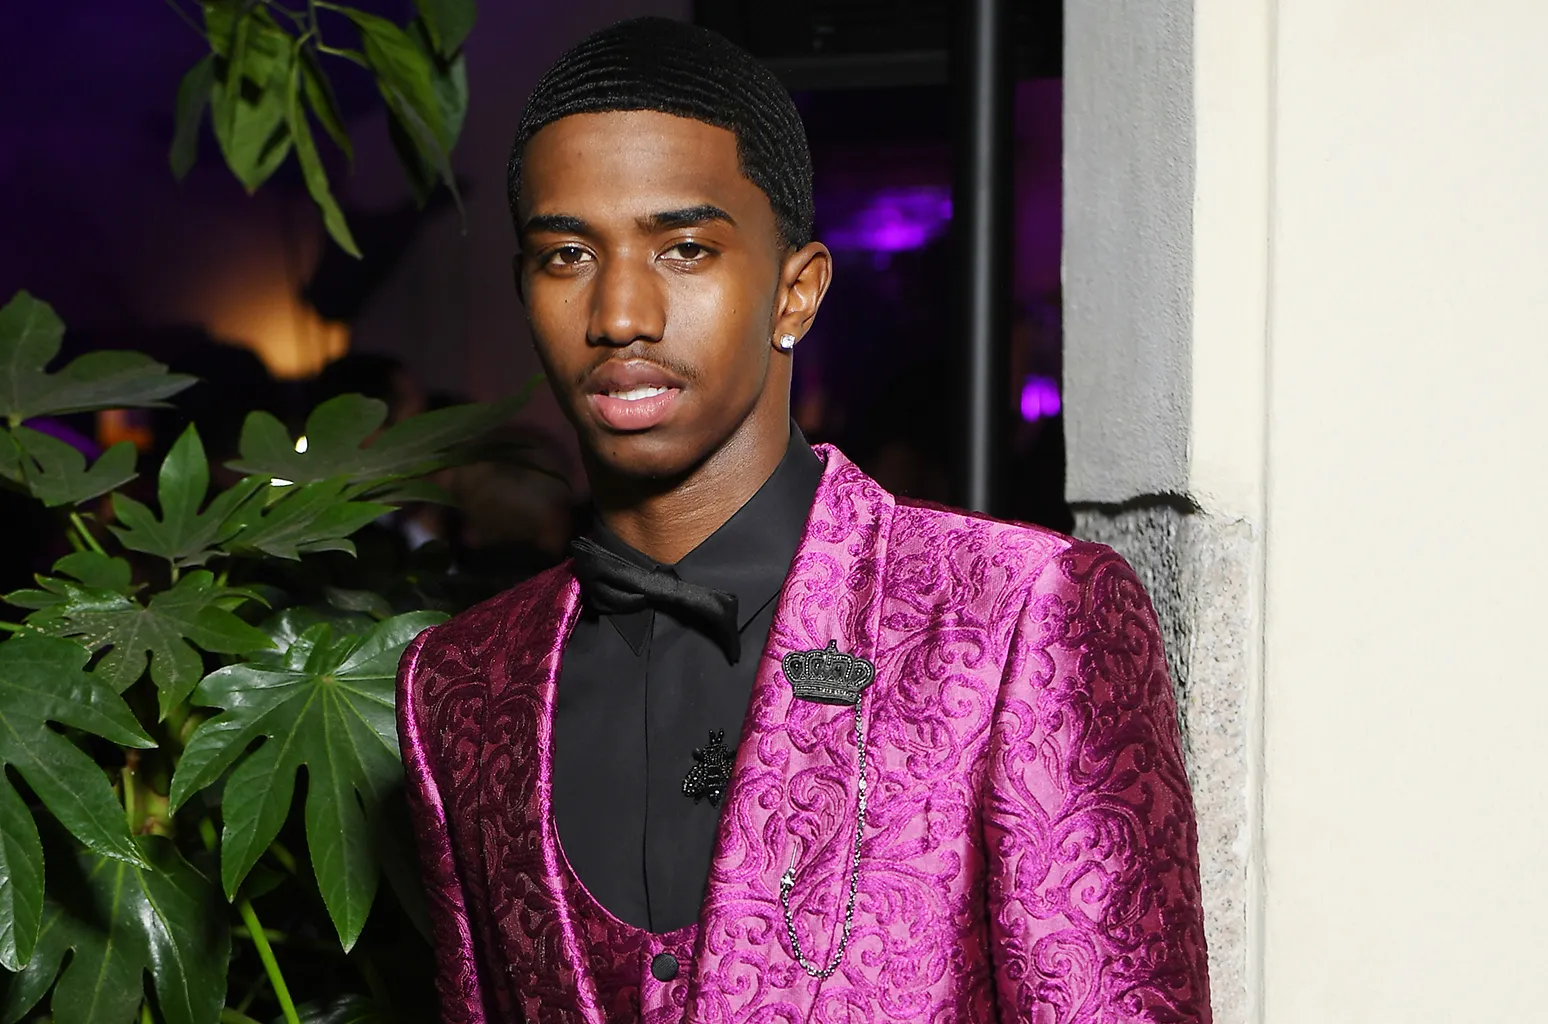 Sean ‘Diddy’ Combs’ Son Accused of Sex Assault in Lawsuit That Also Names Music Mogul as Defendant